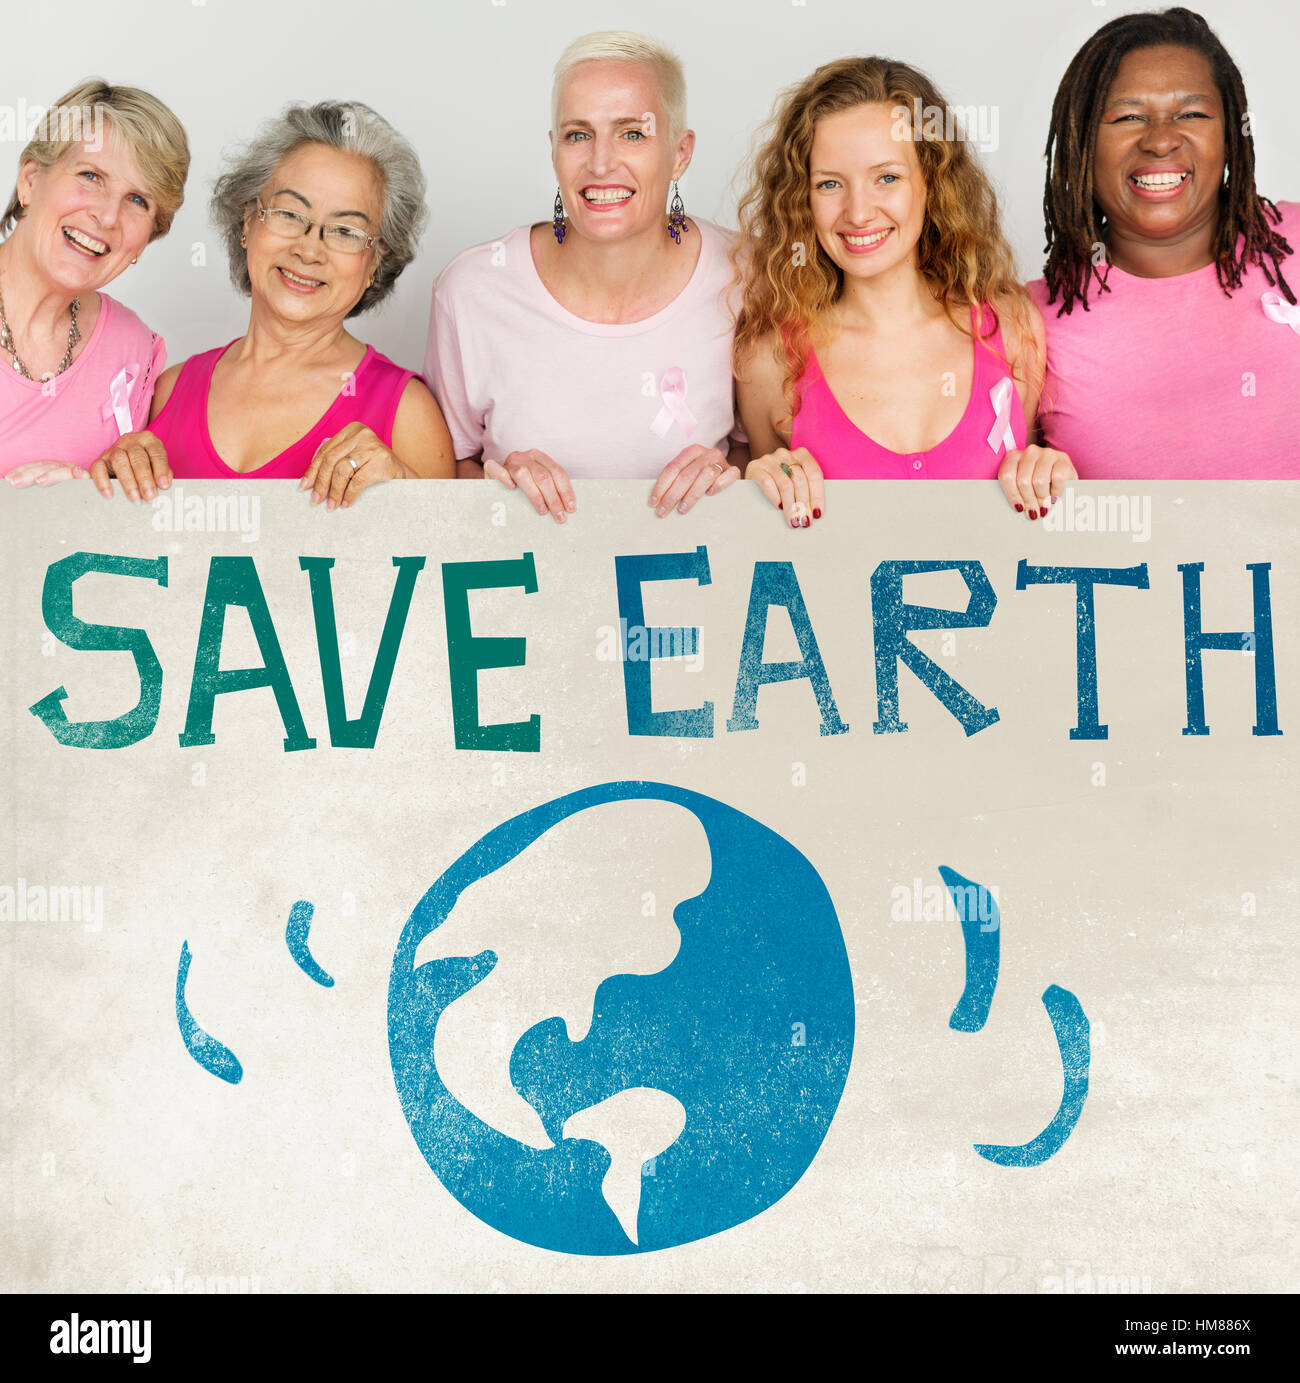 Earth Day Save Ecology Environment Conservation Concept Stock Photo